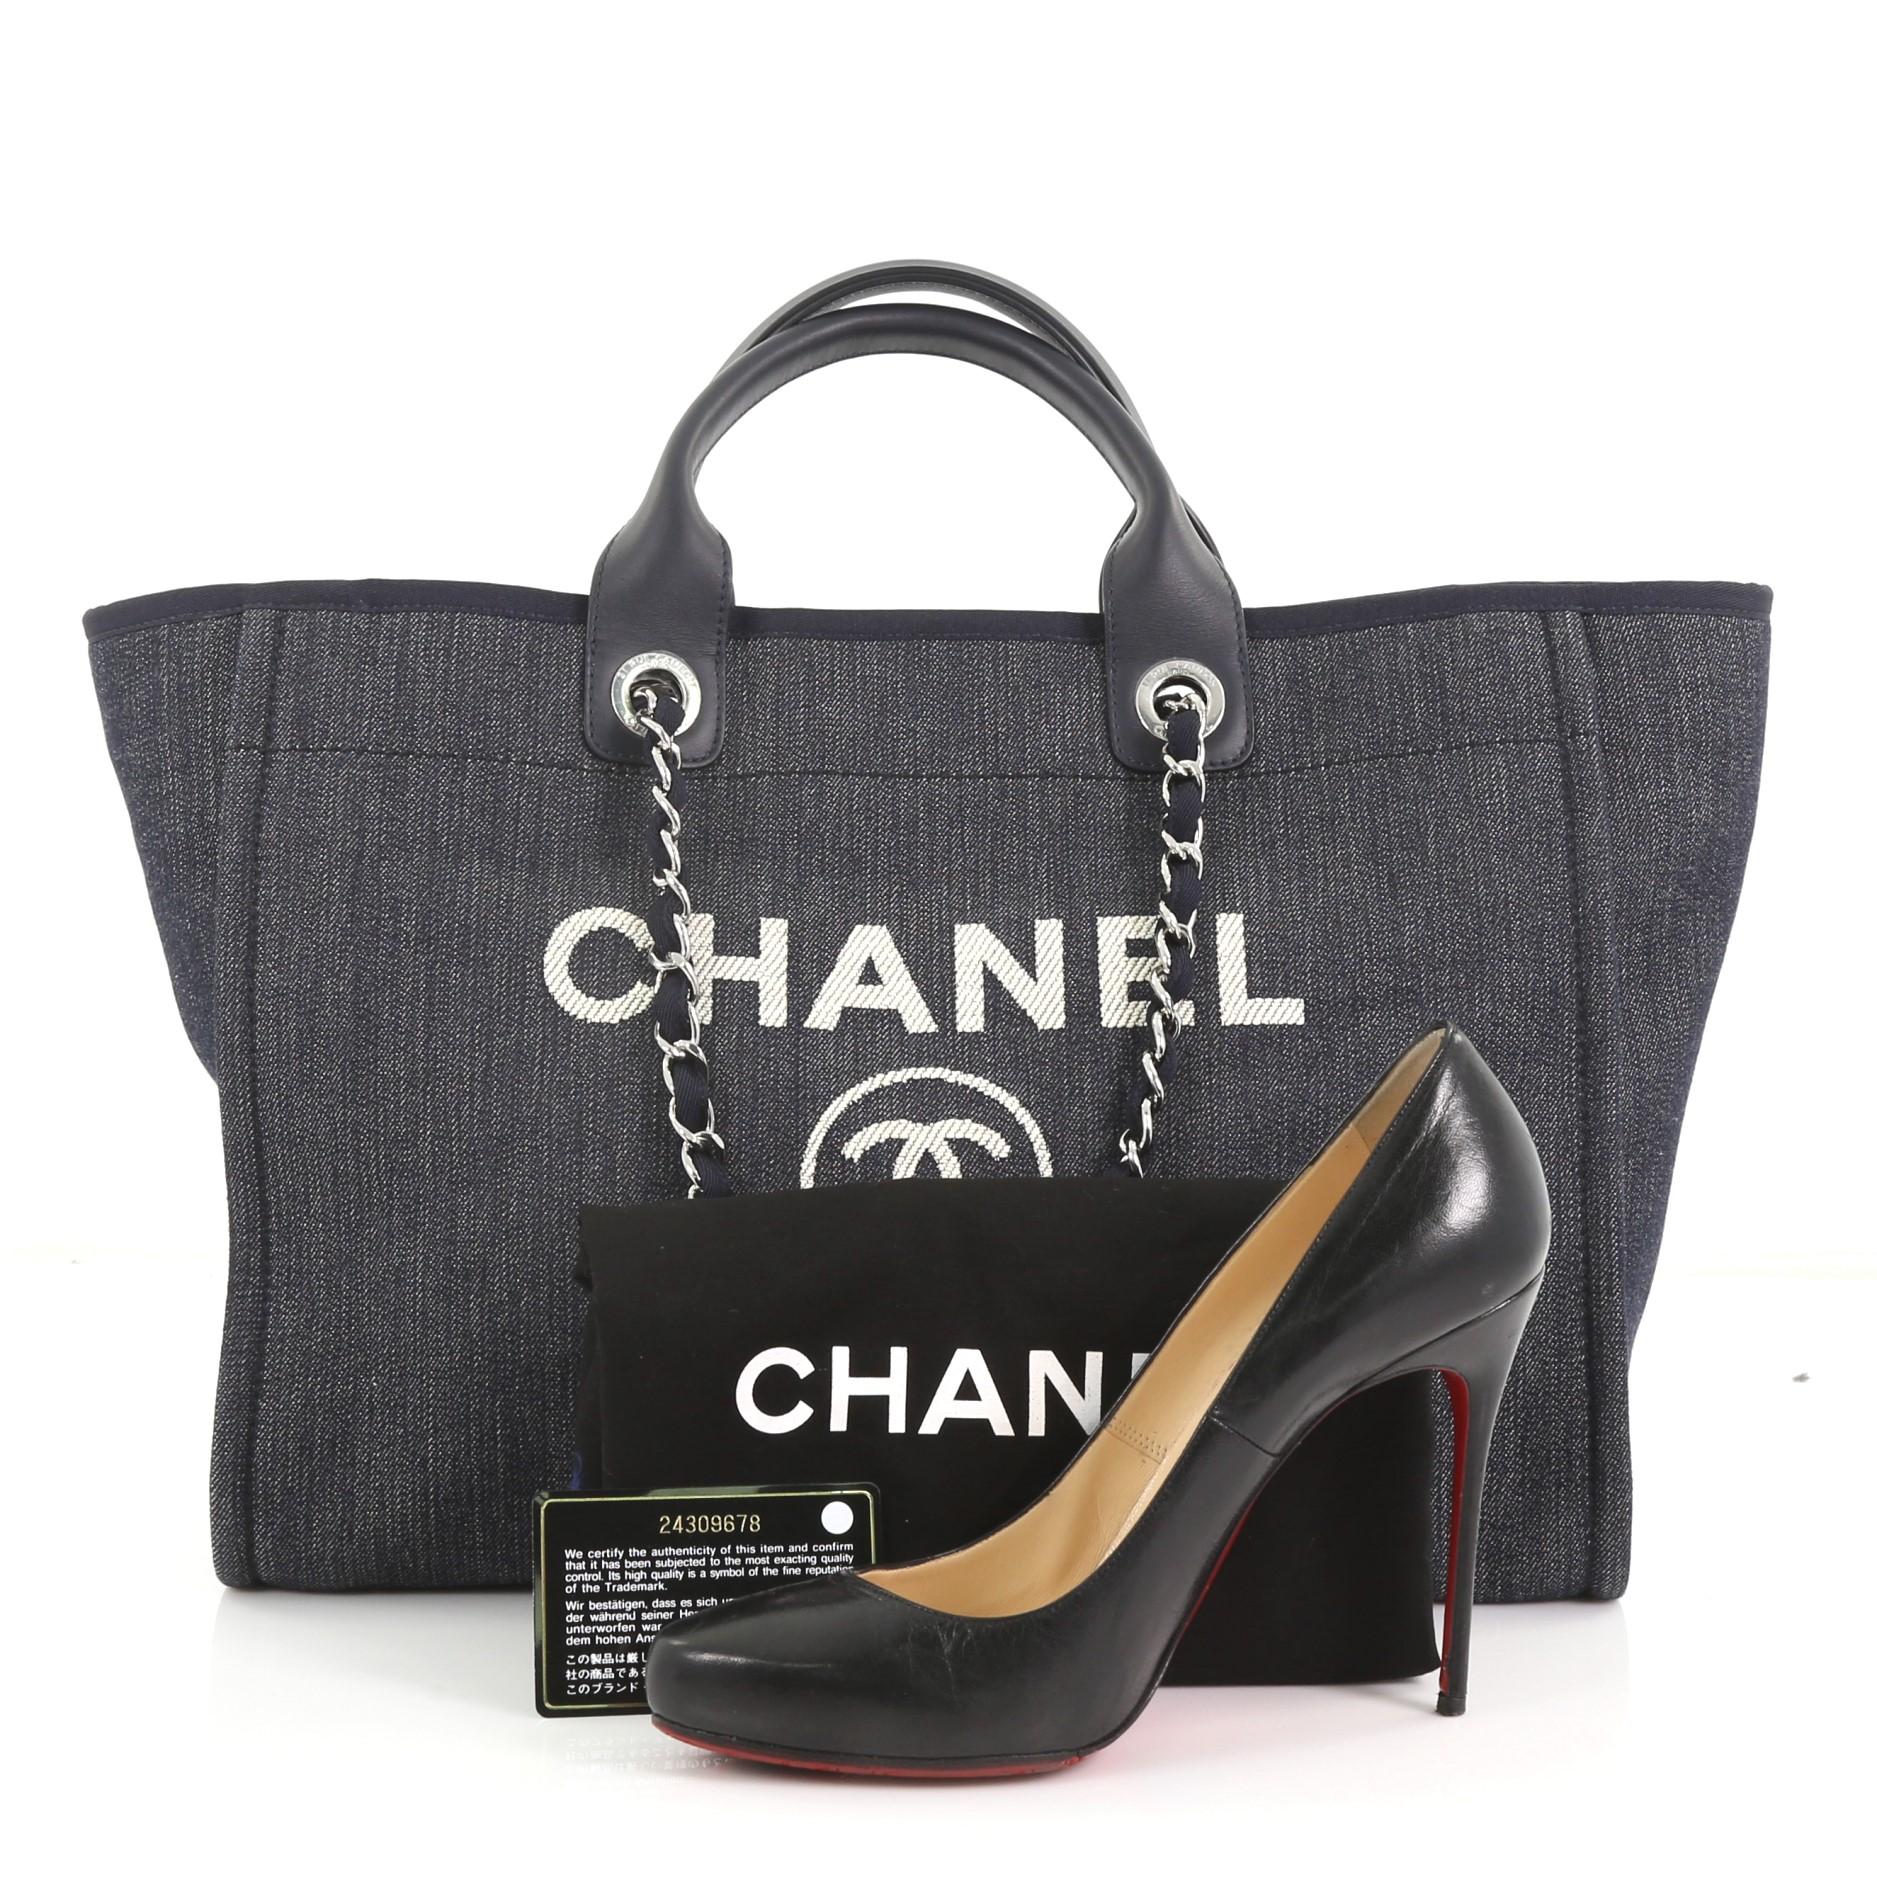 This Chanel Deauville Chain Tote Denim Medium, crafted in blue denim, features dual rolled leather handles, woven-in chain link straps, printed CC logo with Chanel's famous Parisian store address and silver-tone hardware. Its magnetic snap closure